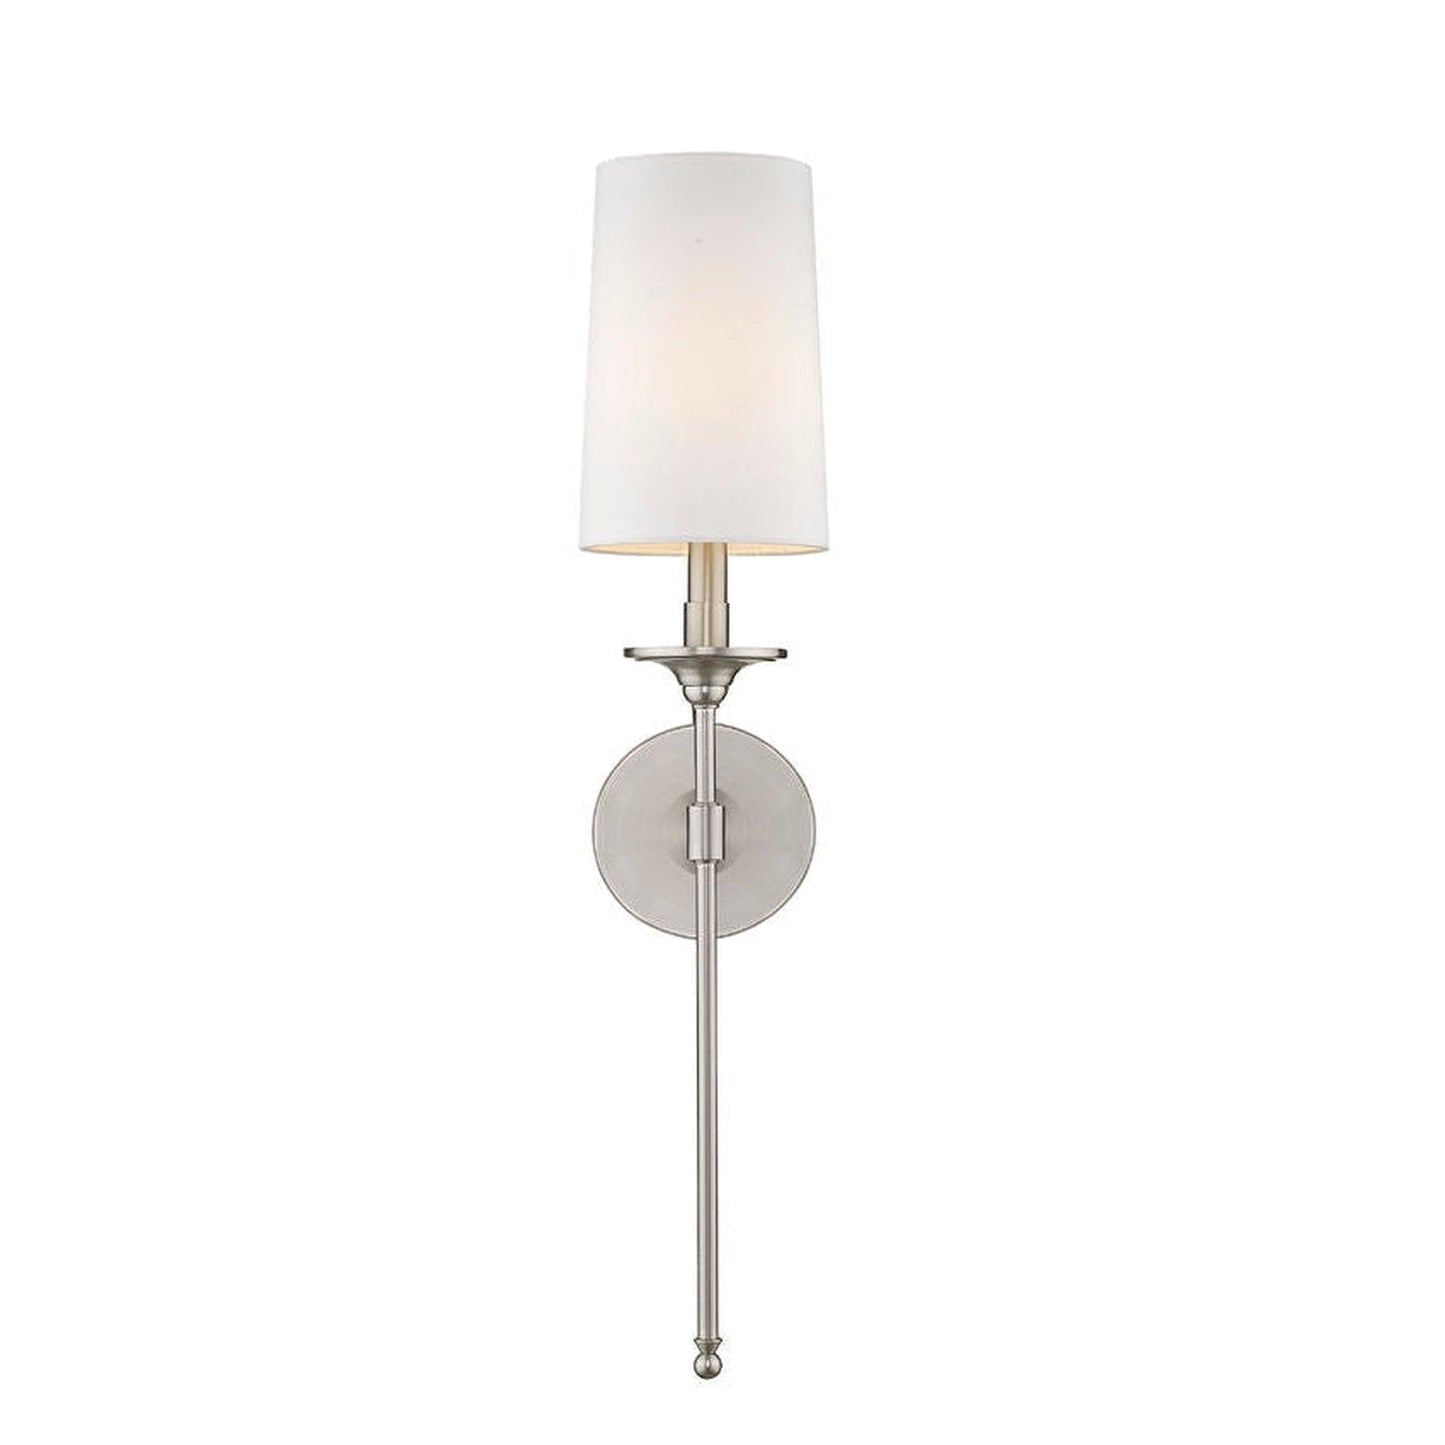 Z-Lite Emily 6" 1-Light Brushed Nickel Wall Sconce With White Fabric Shade